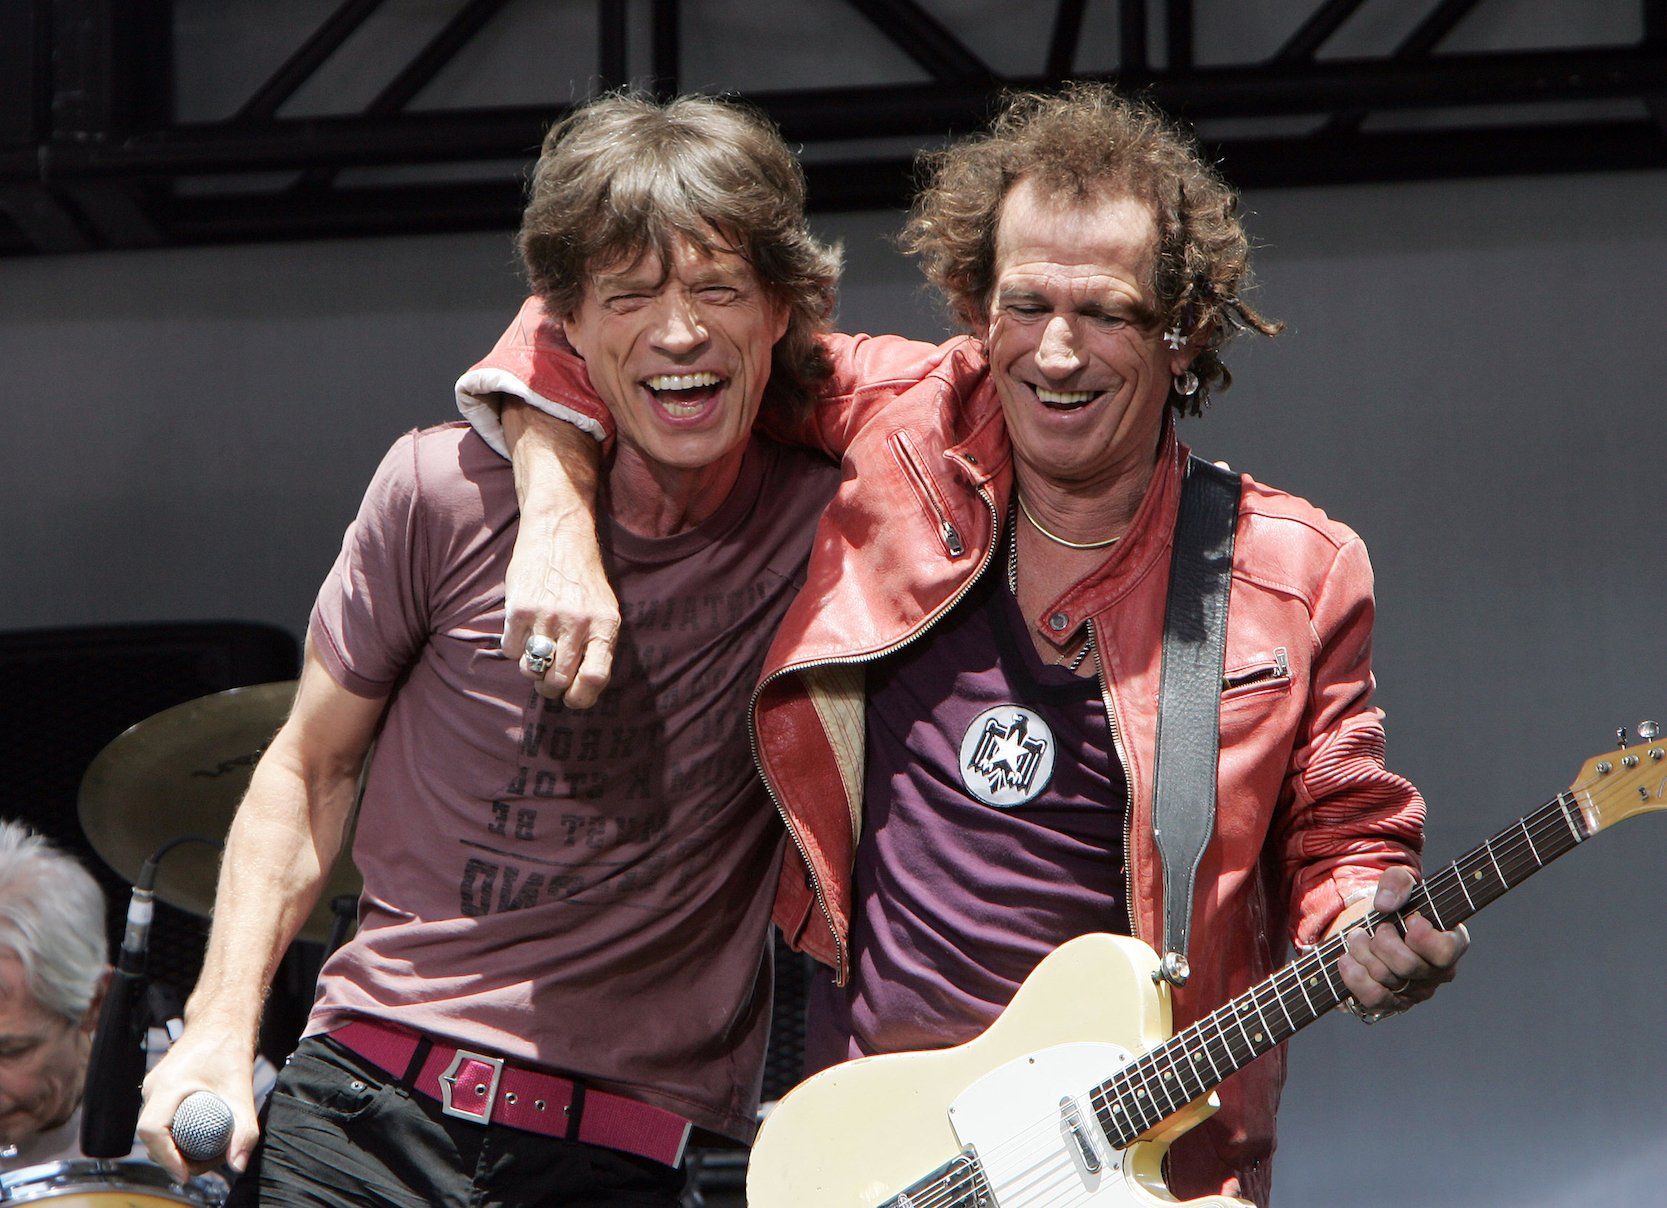 Mick Jagger and Keith Richards perform in New York City